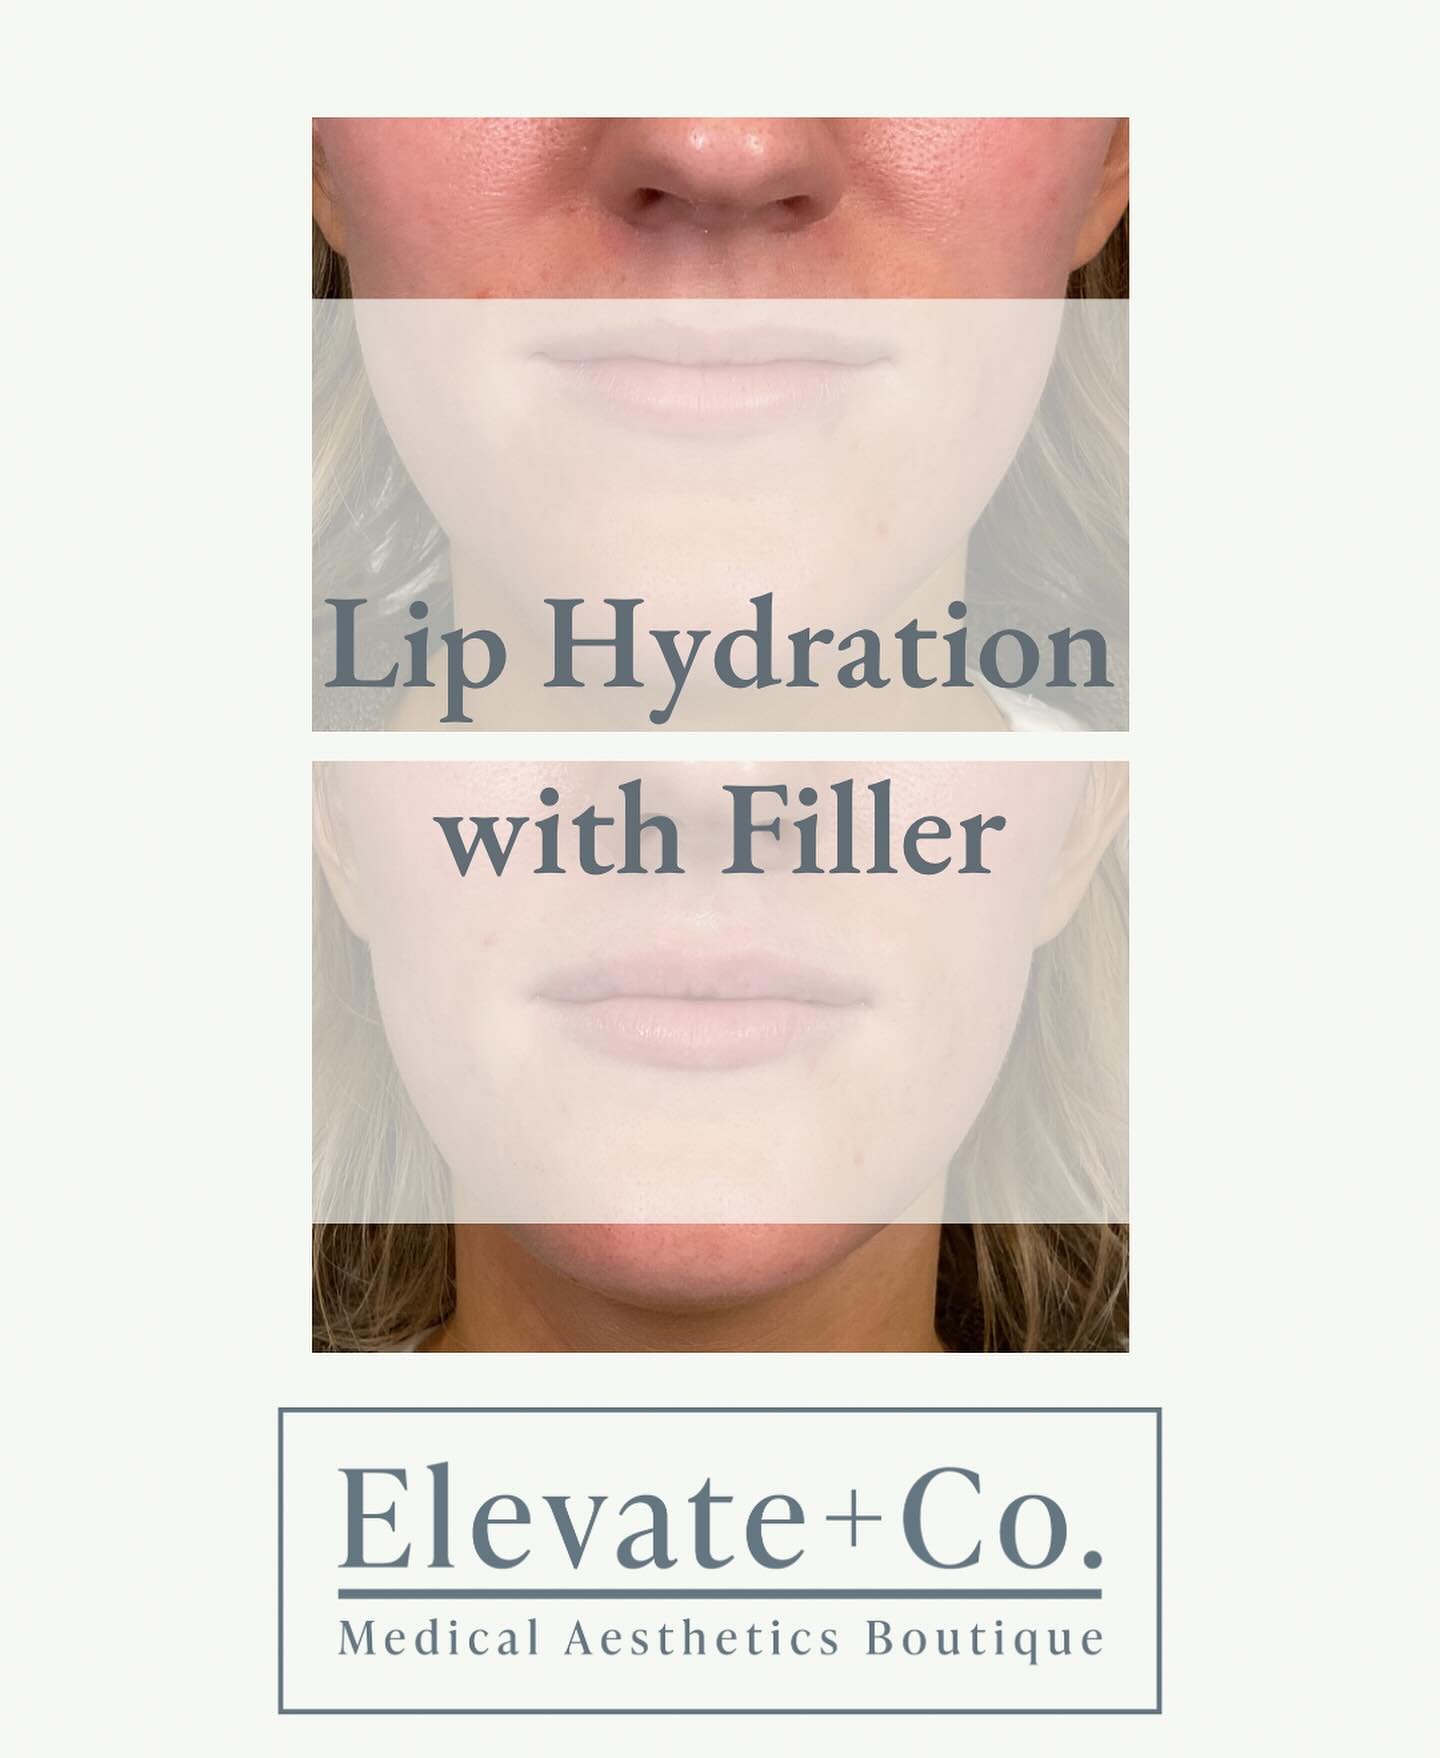 We love a little lip hydration around here. 😍

Filler treatments can look natural and subtle. Small enhancements when appropriate can still make a big impact! 

Always thankful for our patients putting their trust in us to deliver beautiful aestheti